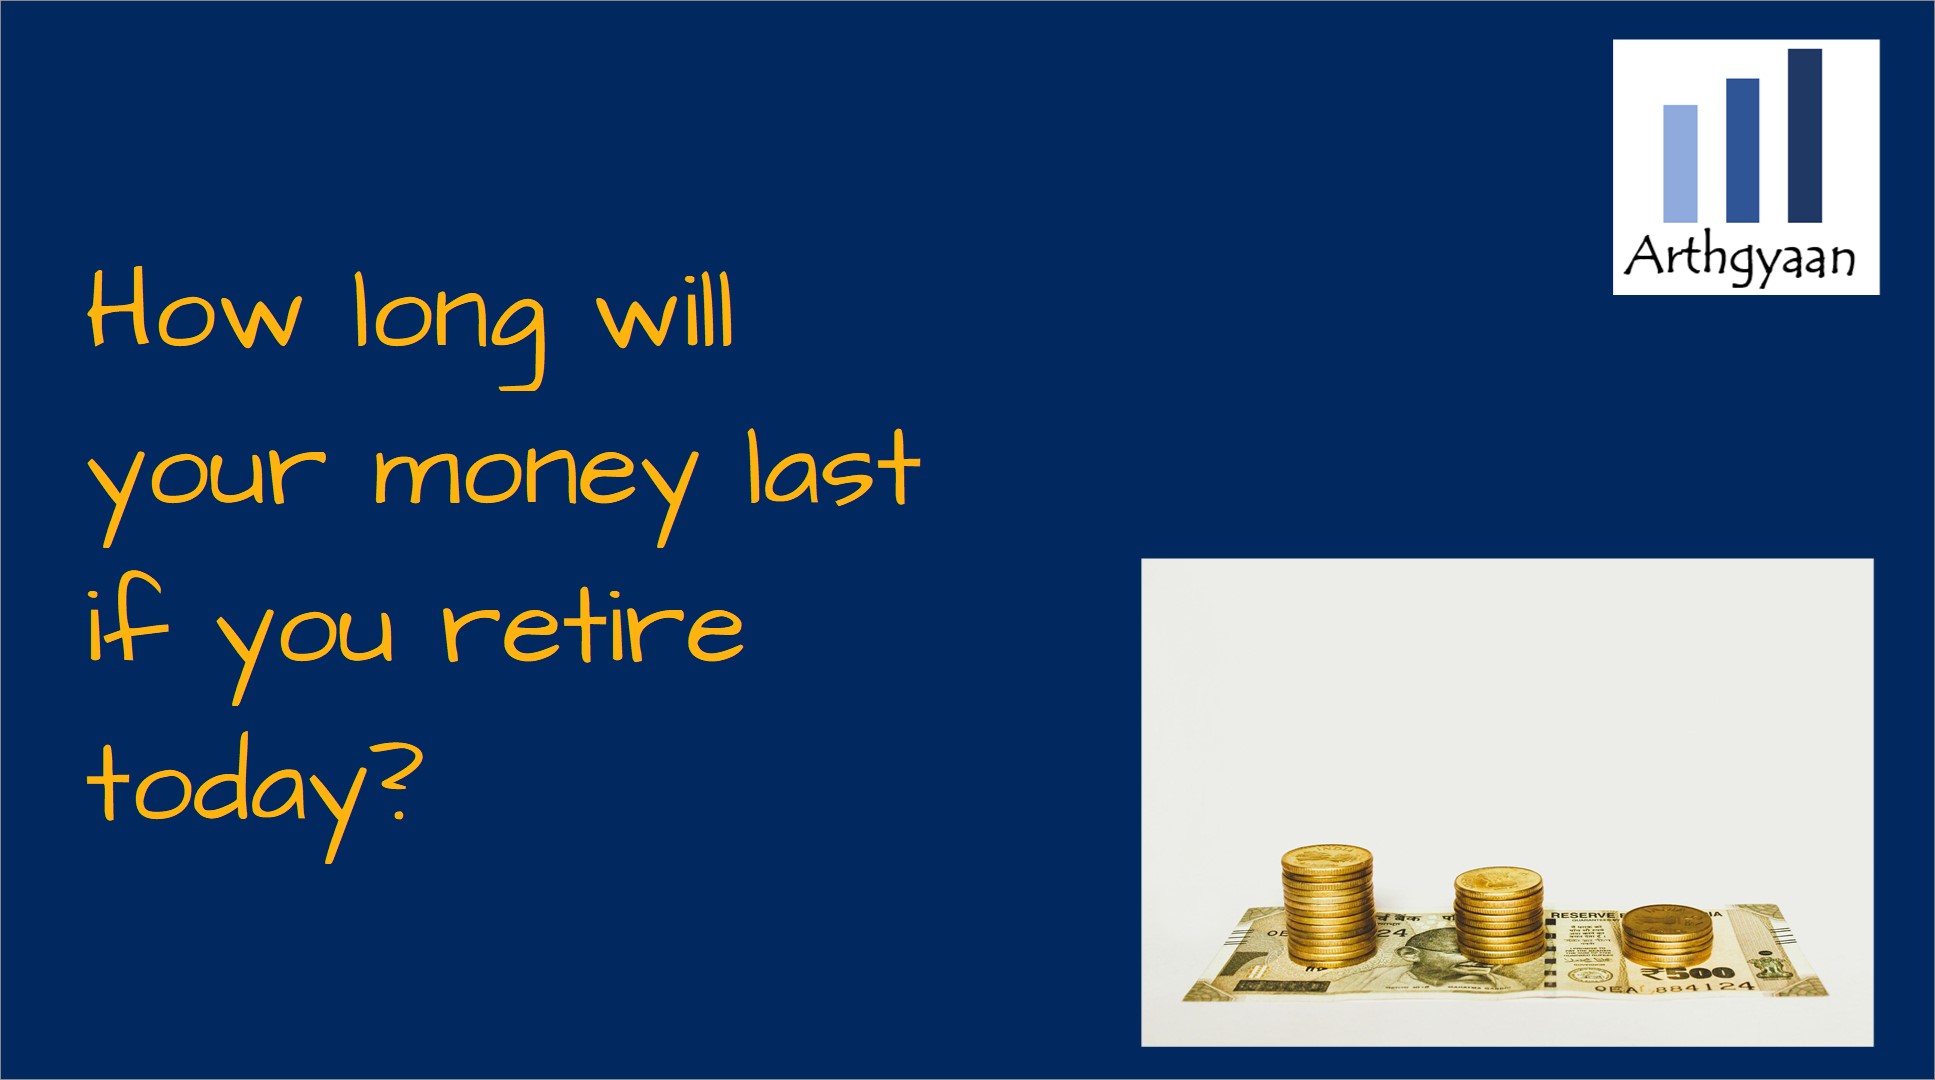 How long will your money last if you retire today?